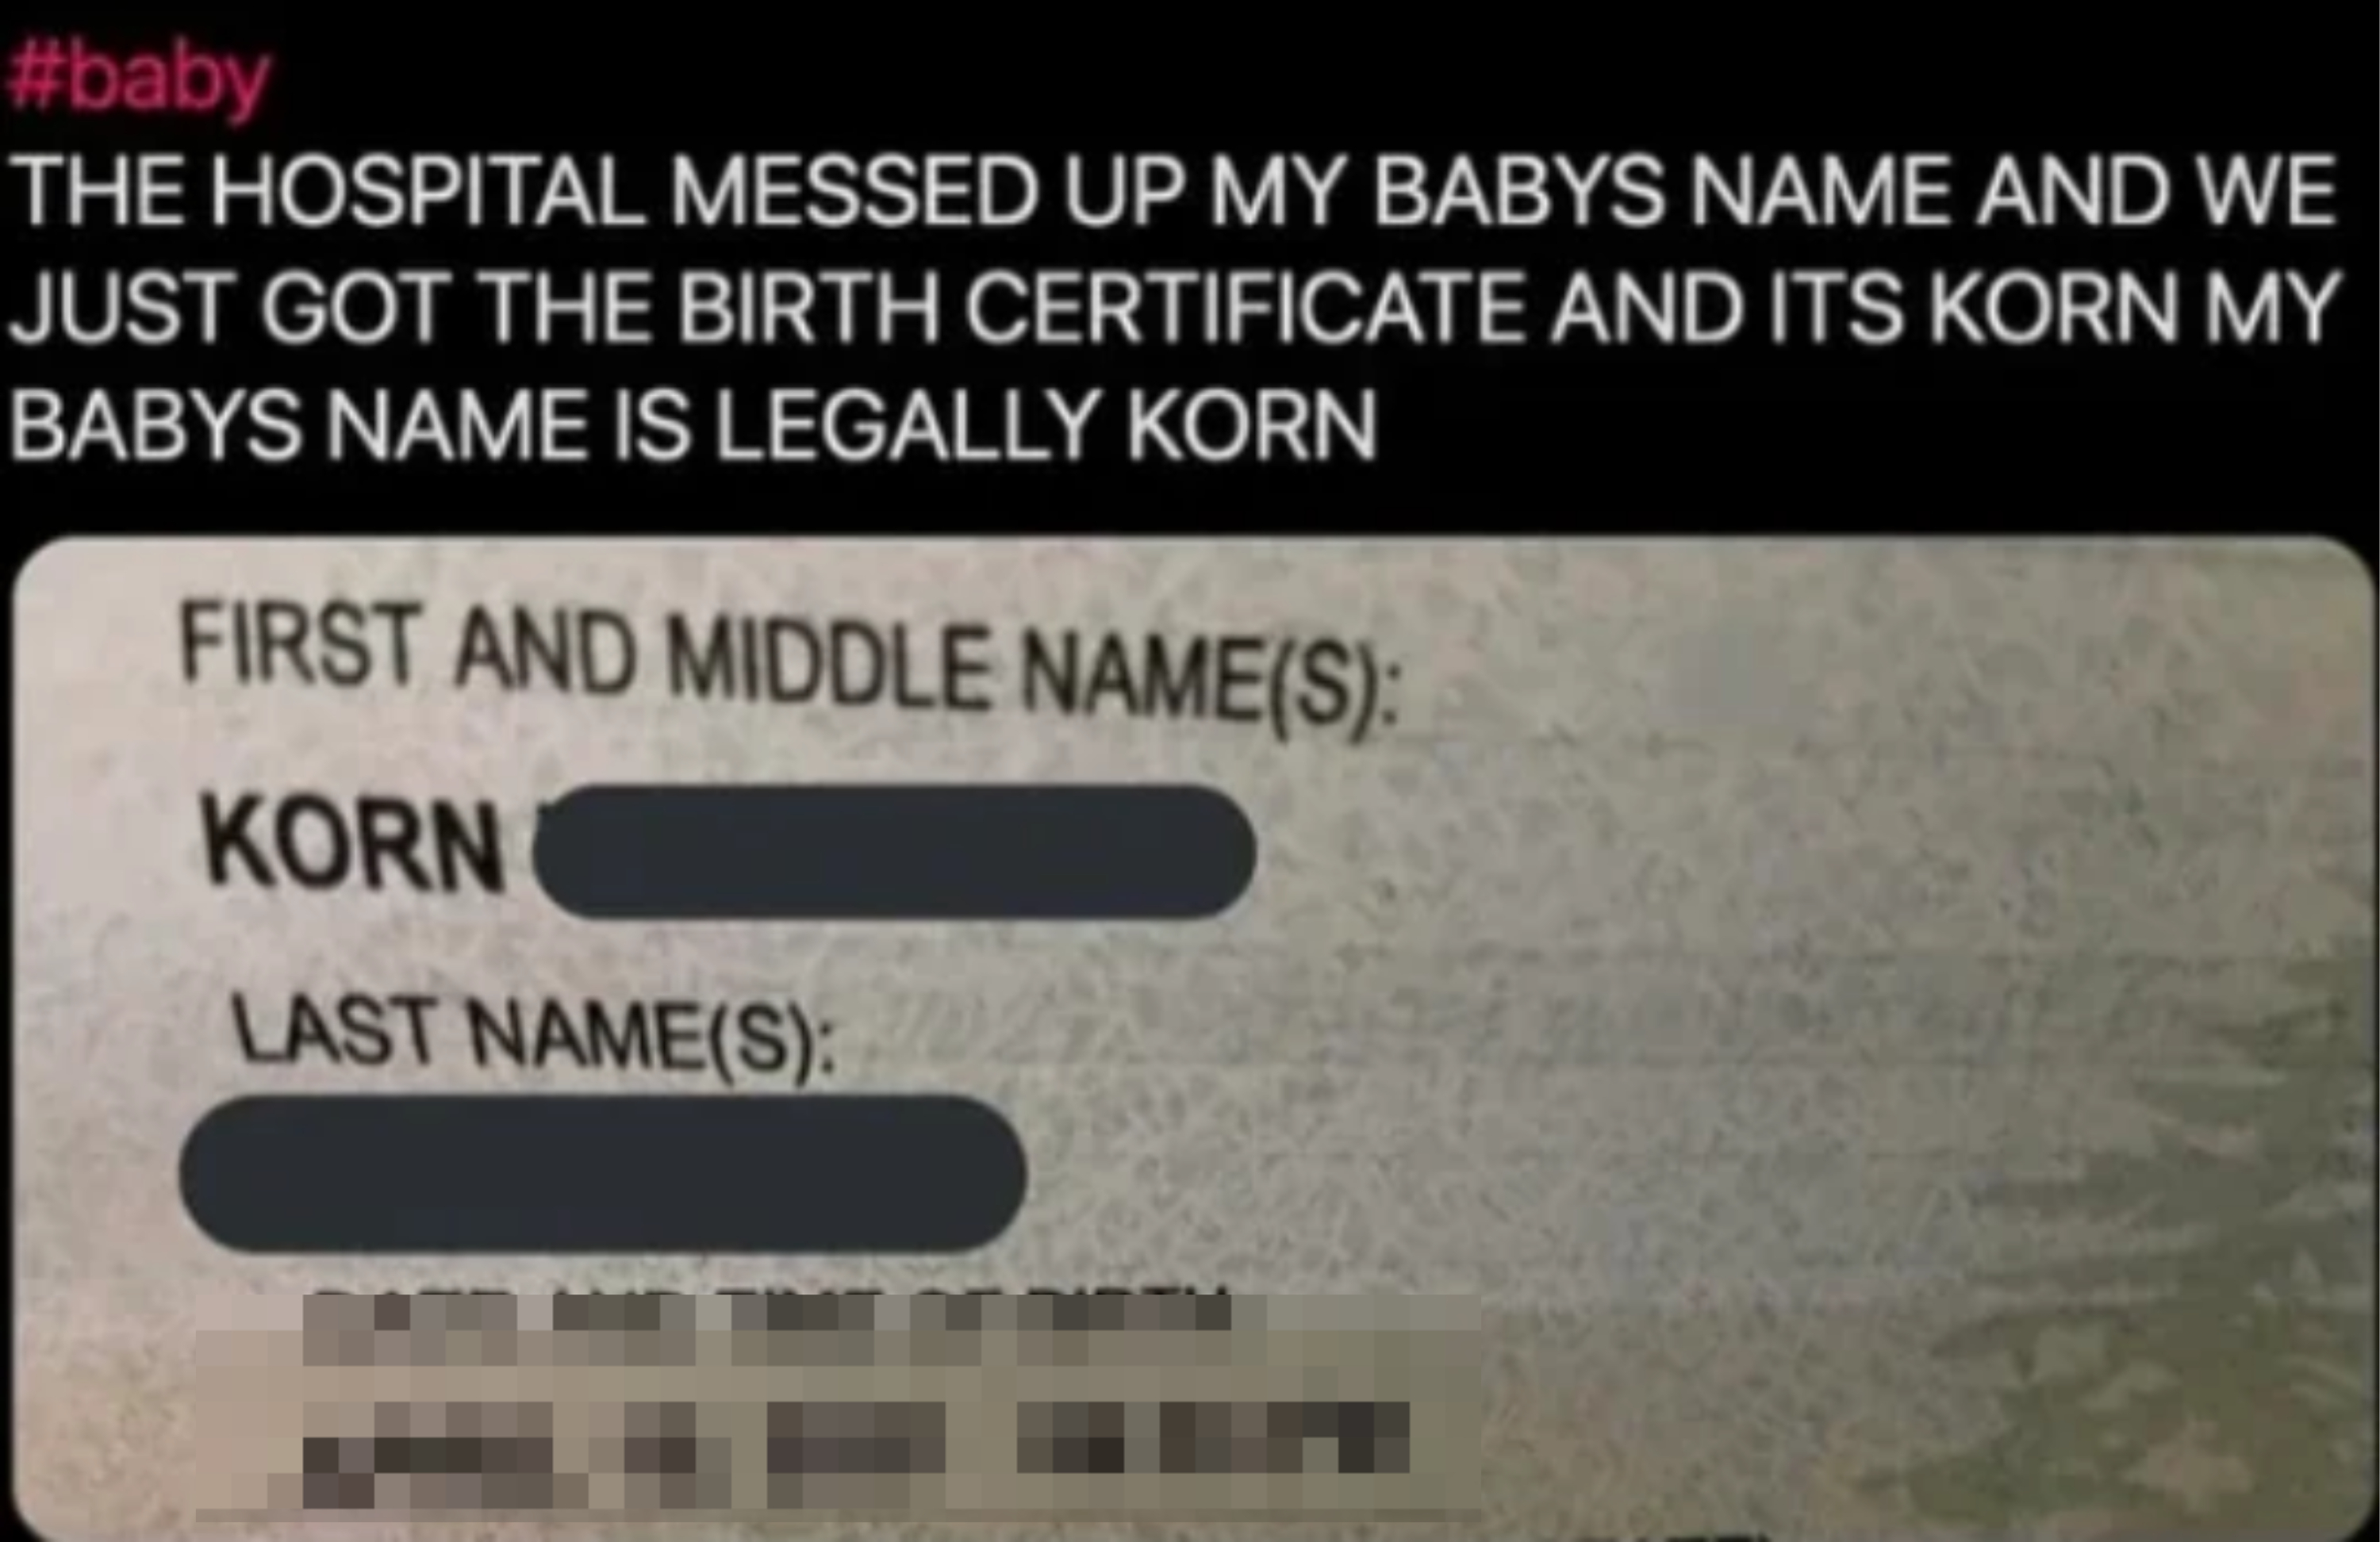 Birth certificate issued with the name Korn, parents express surprise and humor online